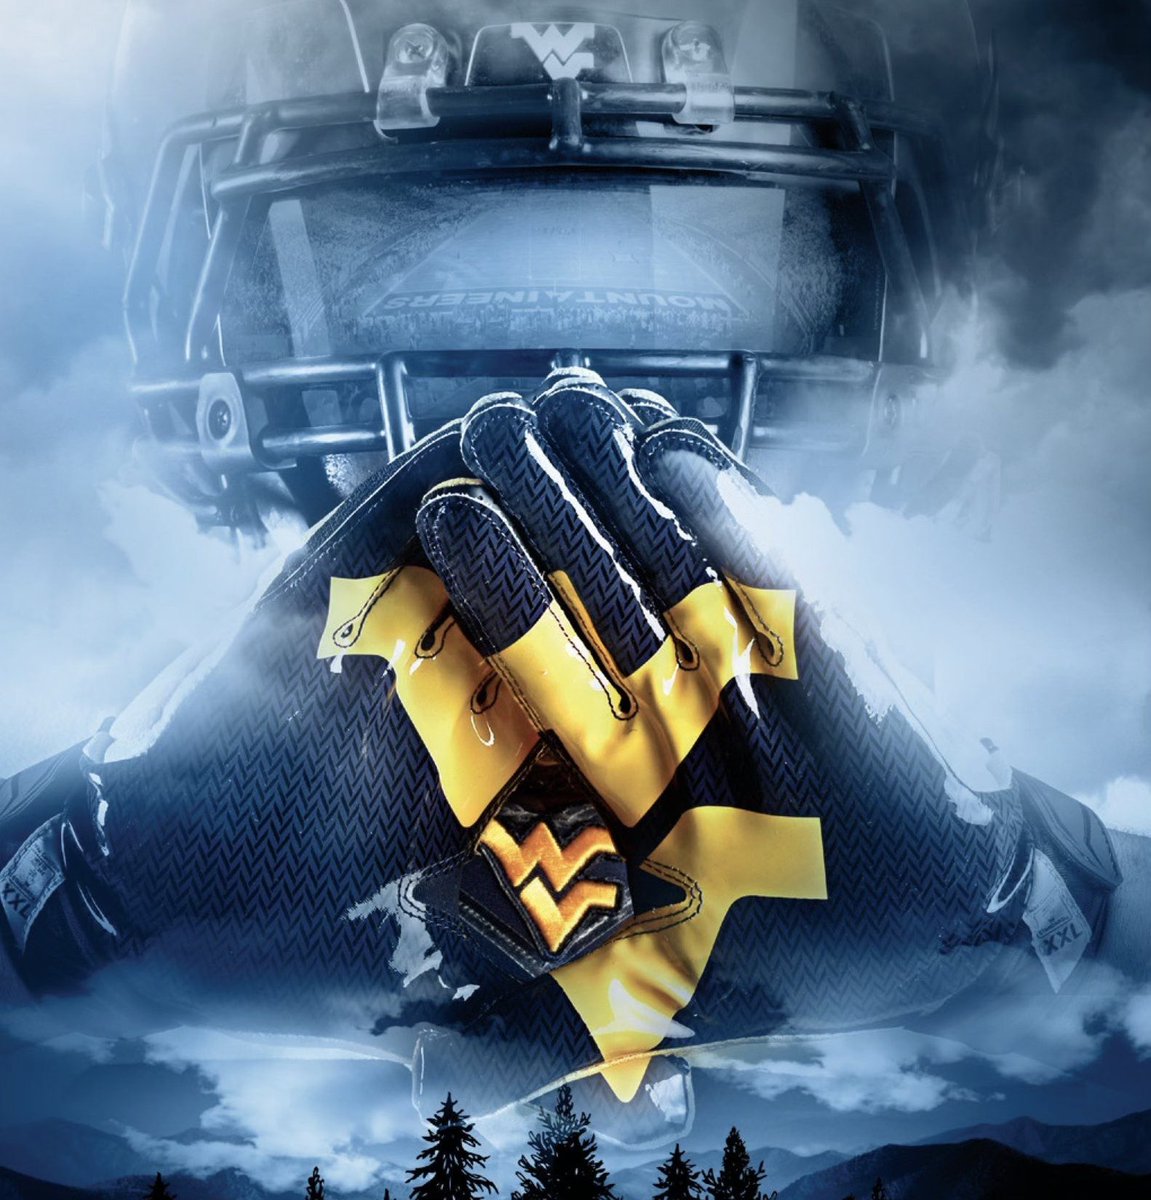 I am beyond blessed to have received my first offer from West Virginia University! #AGTG #HailWV Thank you @WVUfootball @CoachBlaineStew @NealBrown_WVU @barlow_coach @MattGriffis16 @WGroveFootball1 @SpeedhouseV